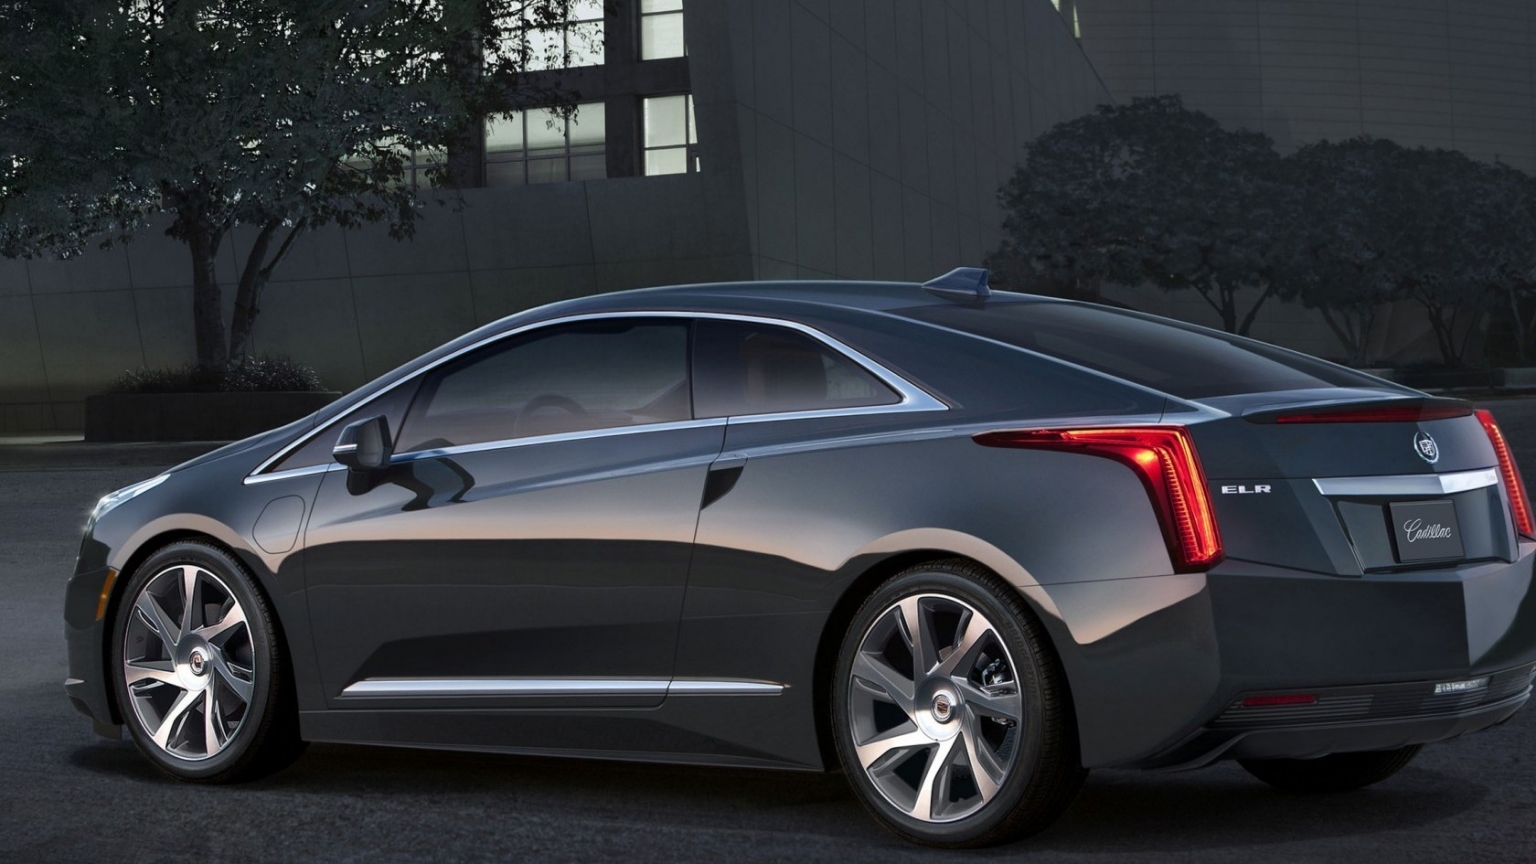 Cadillac ELR Front View for 1536 x 864 HDTV resolution